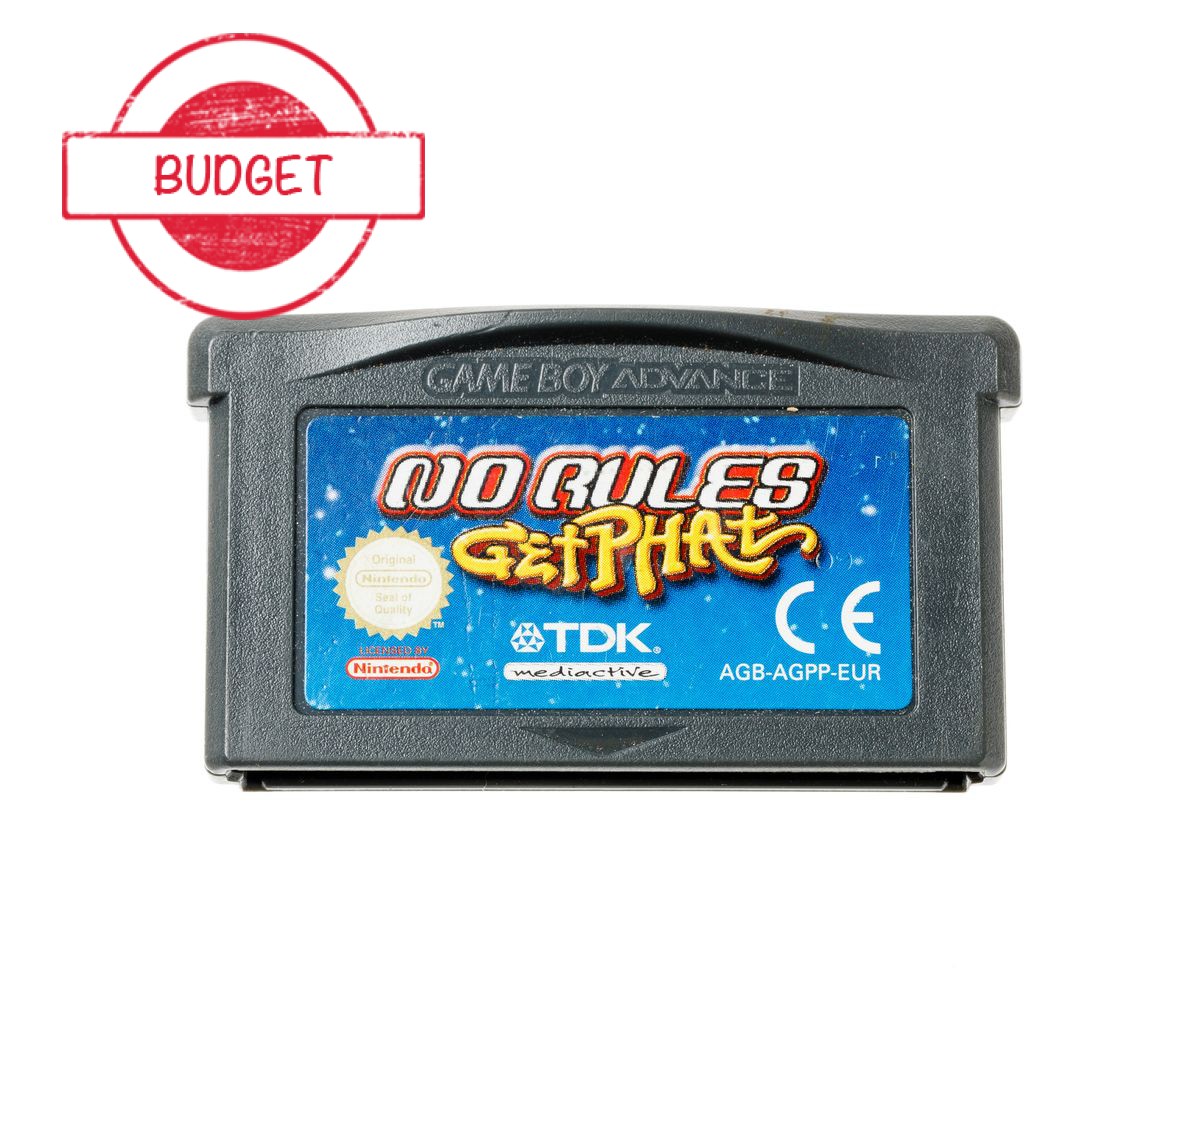 No Rules Get Phat - Budget Kopen | Gameboy Advance Games